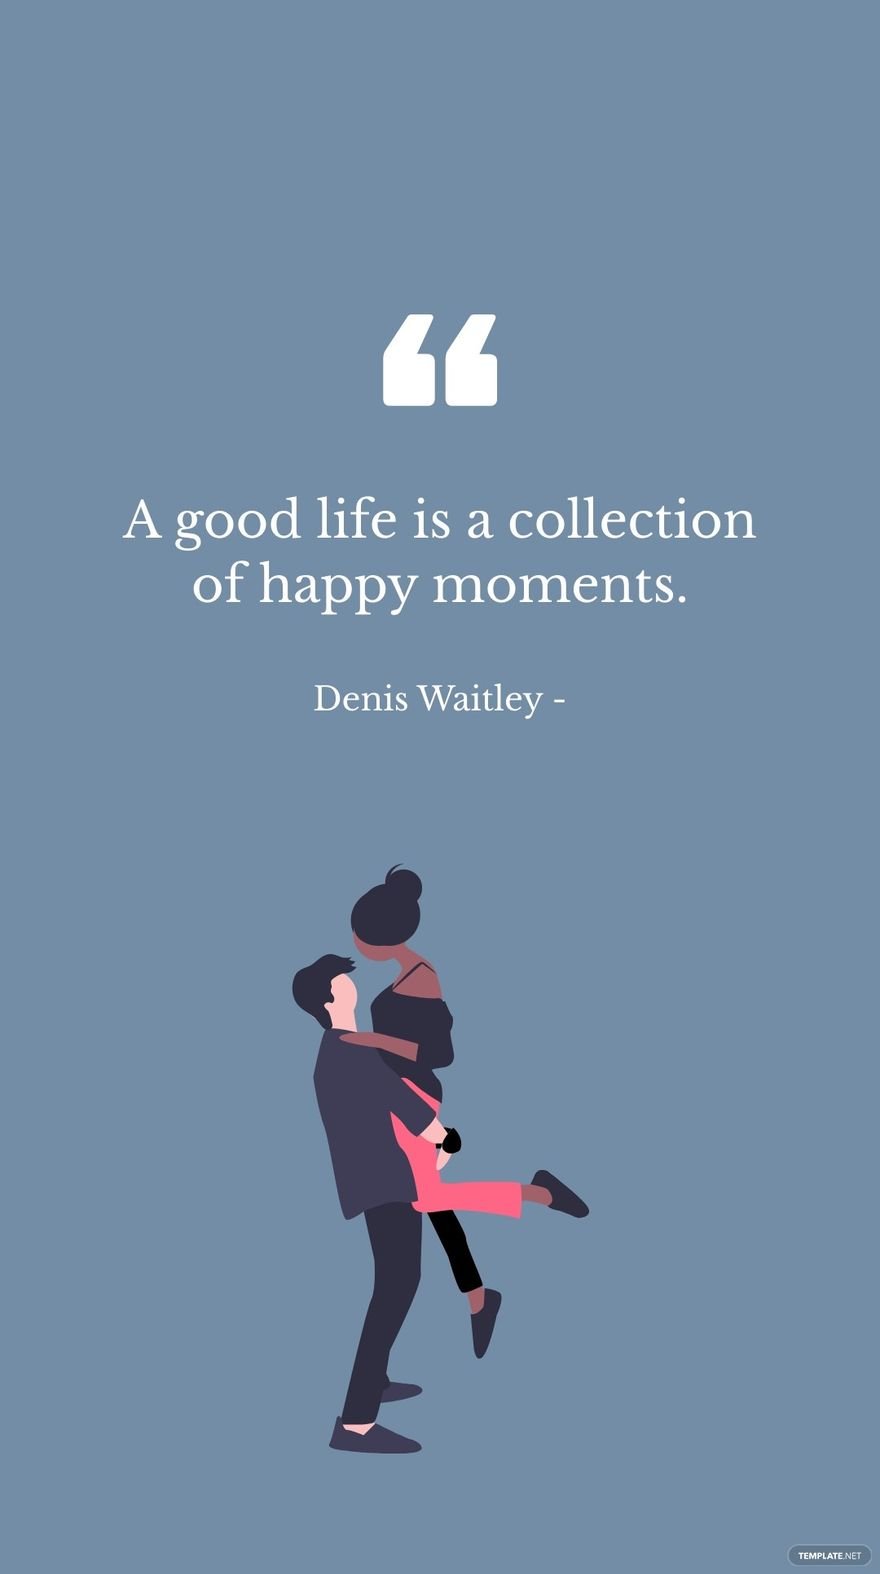 Denis Waitley - A good life is a collection of happy moments. in JPG